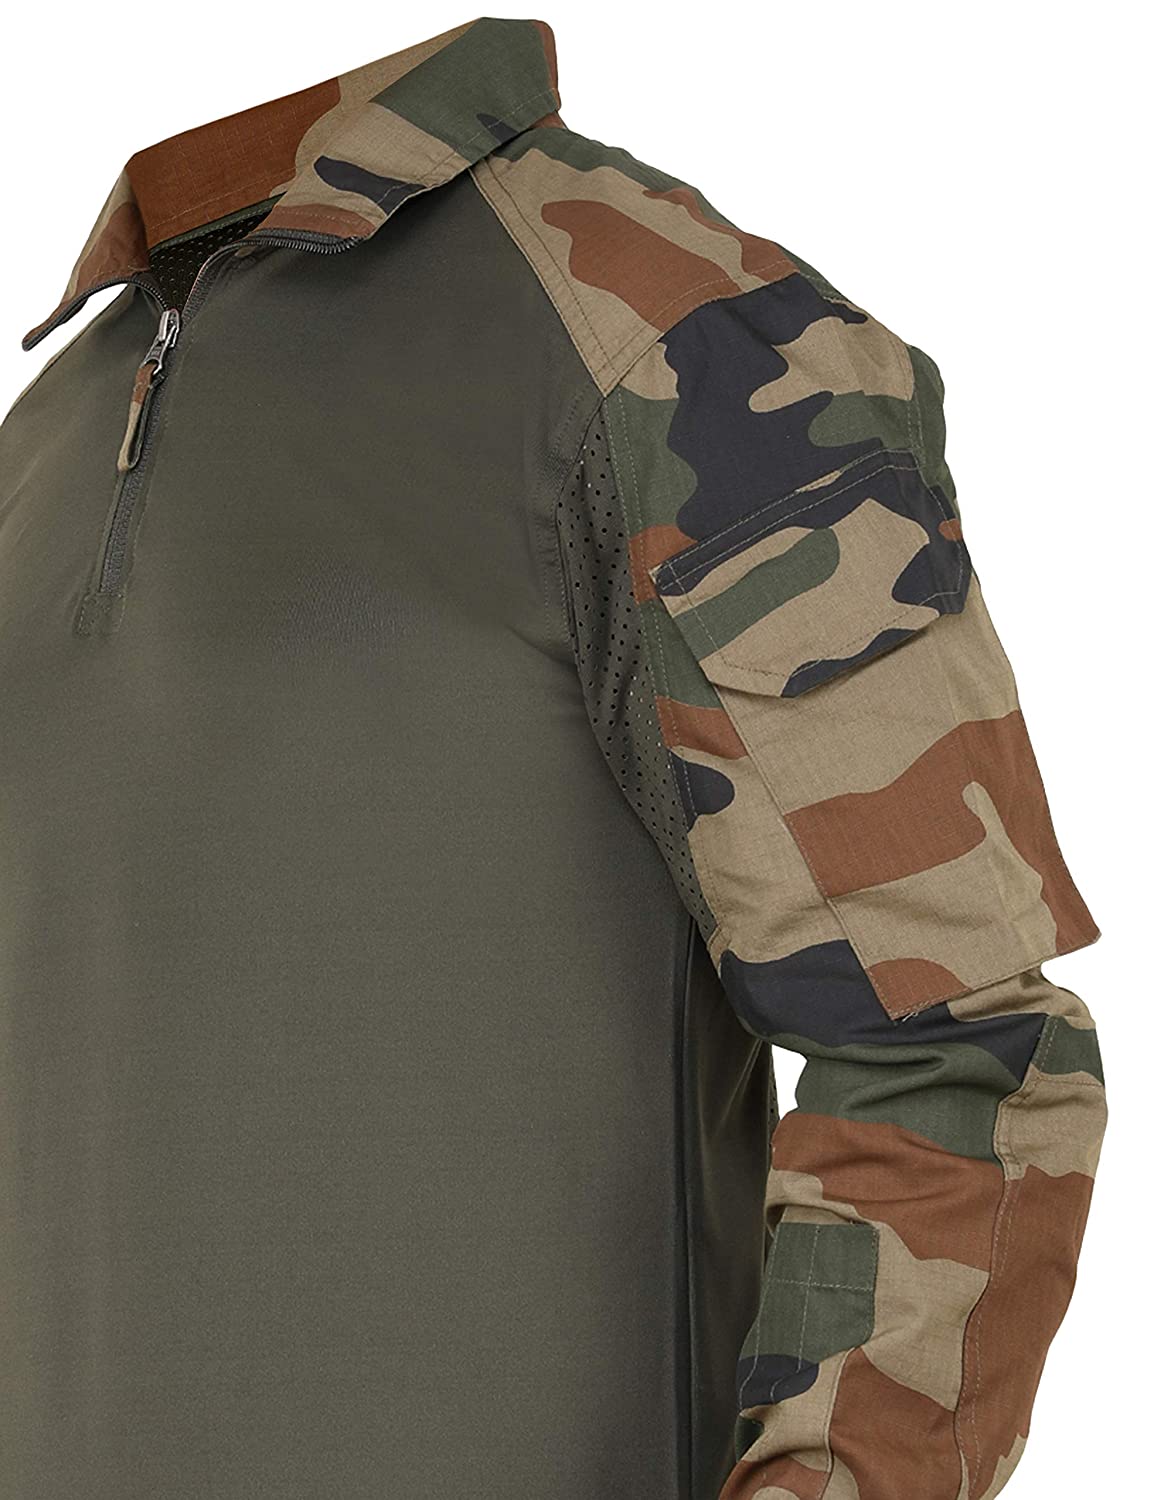 Tactical T Shirt Full Sleeves-Army Print